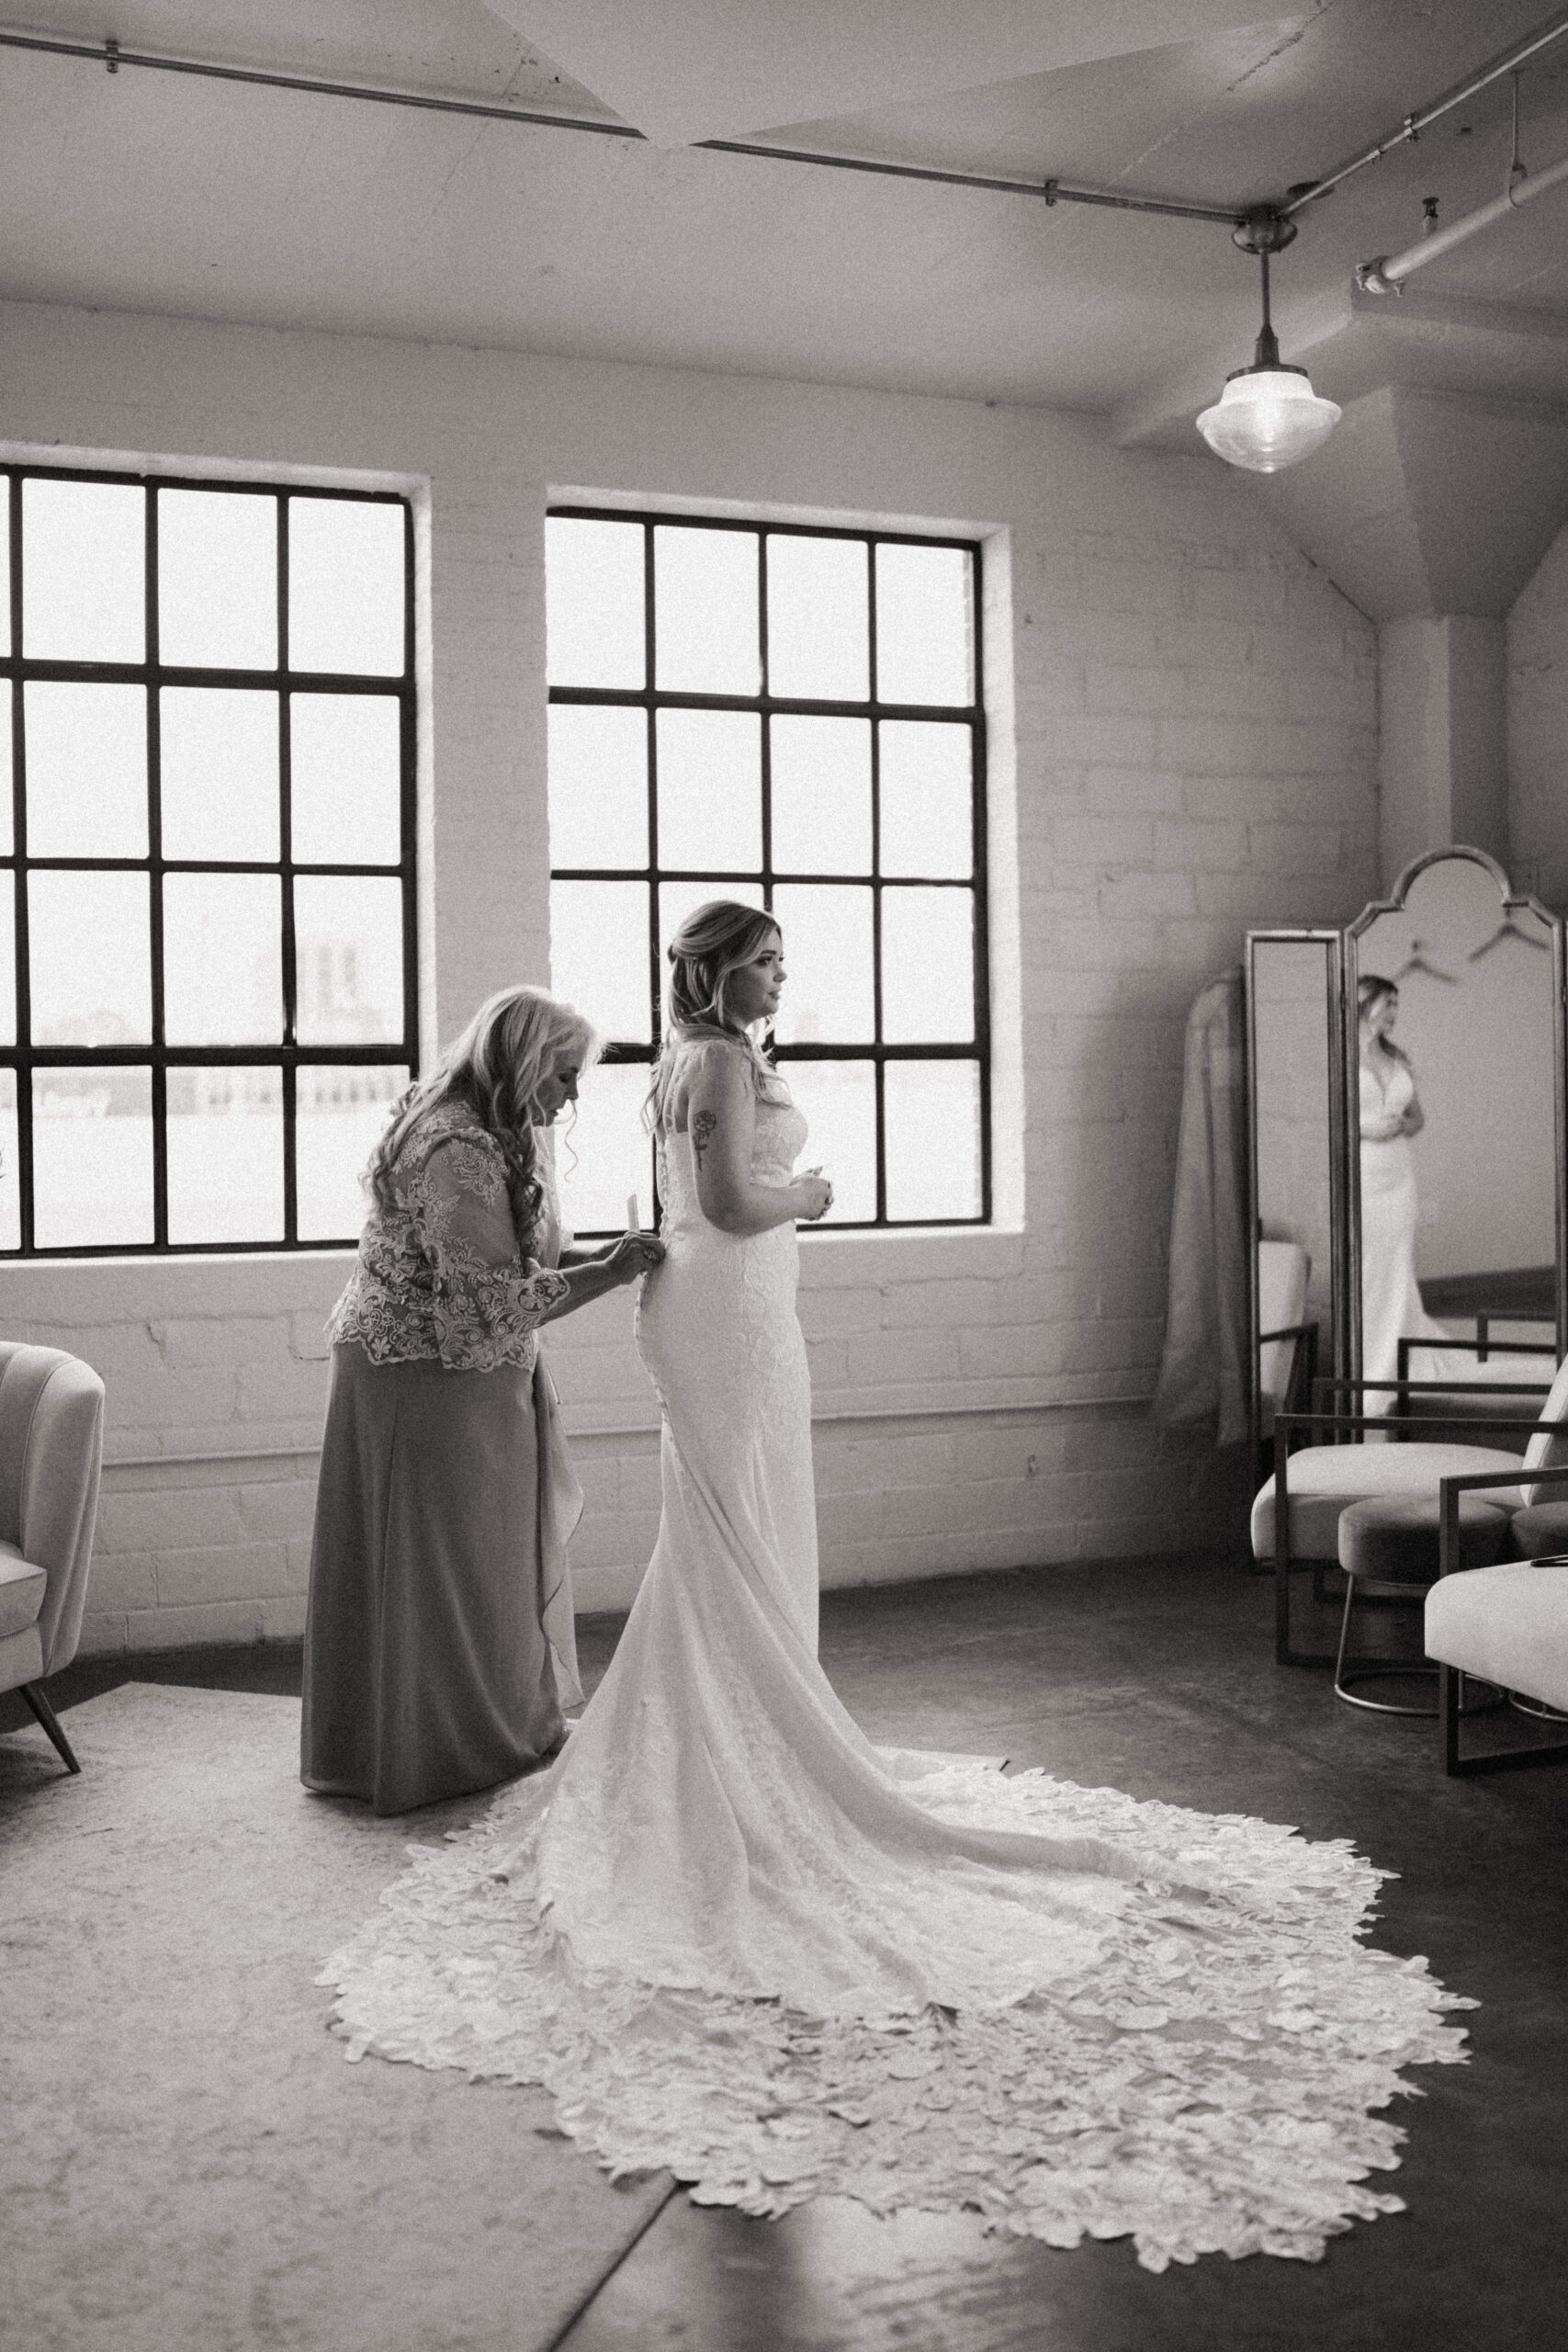 This is a picture of a mom helping her daughter get married on her wedding day